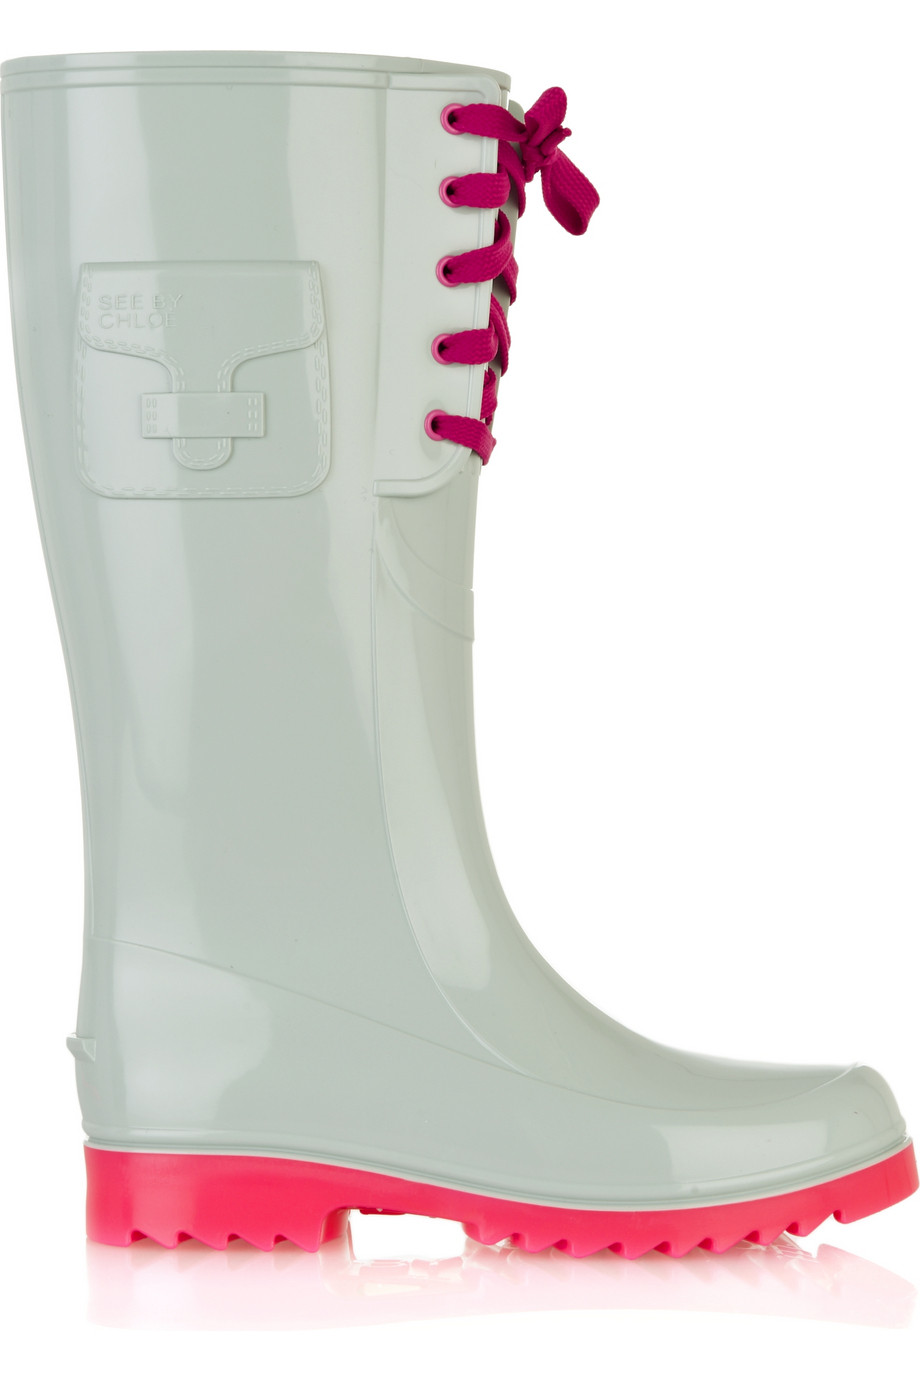 See By Chloé Lace-up Rubber Wellington Boots in Gray - Lyst